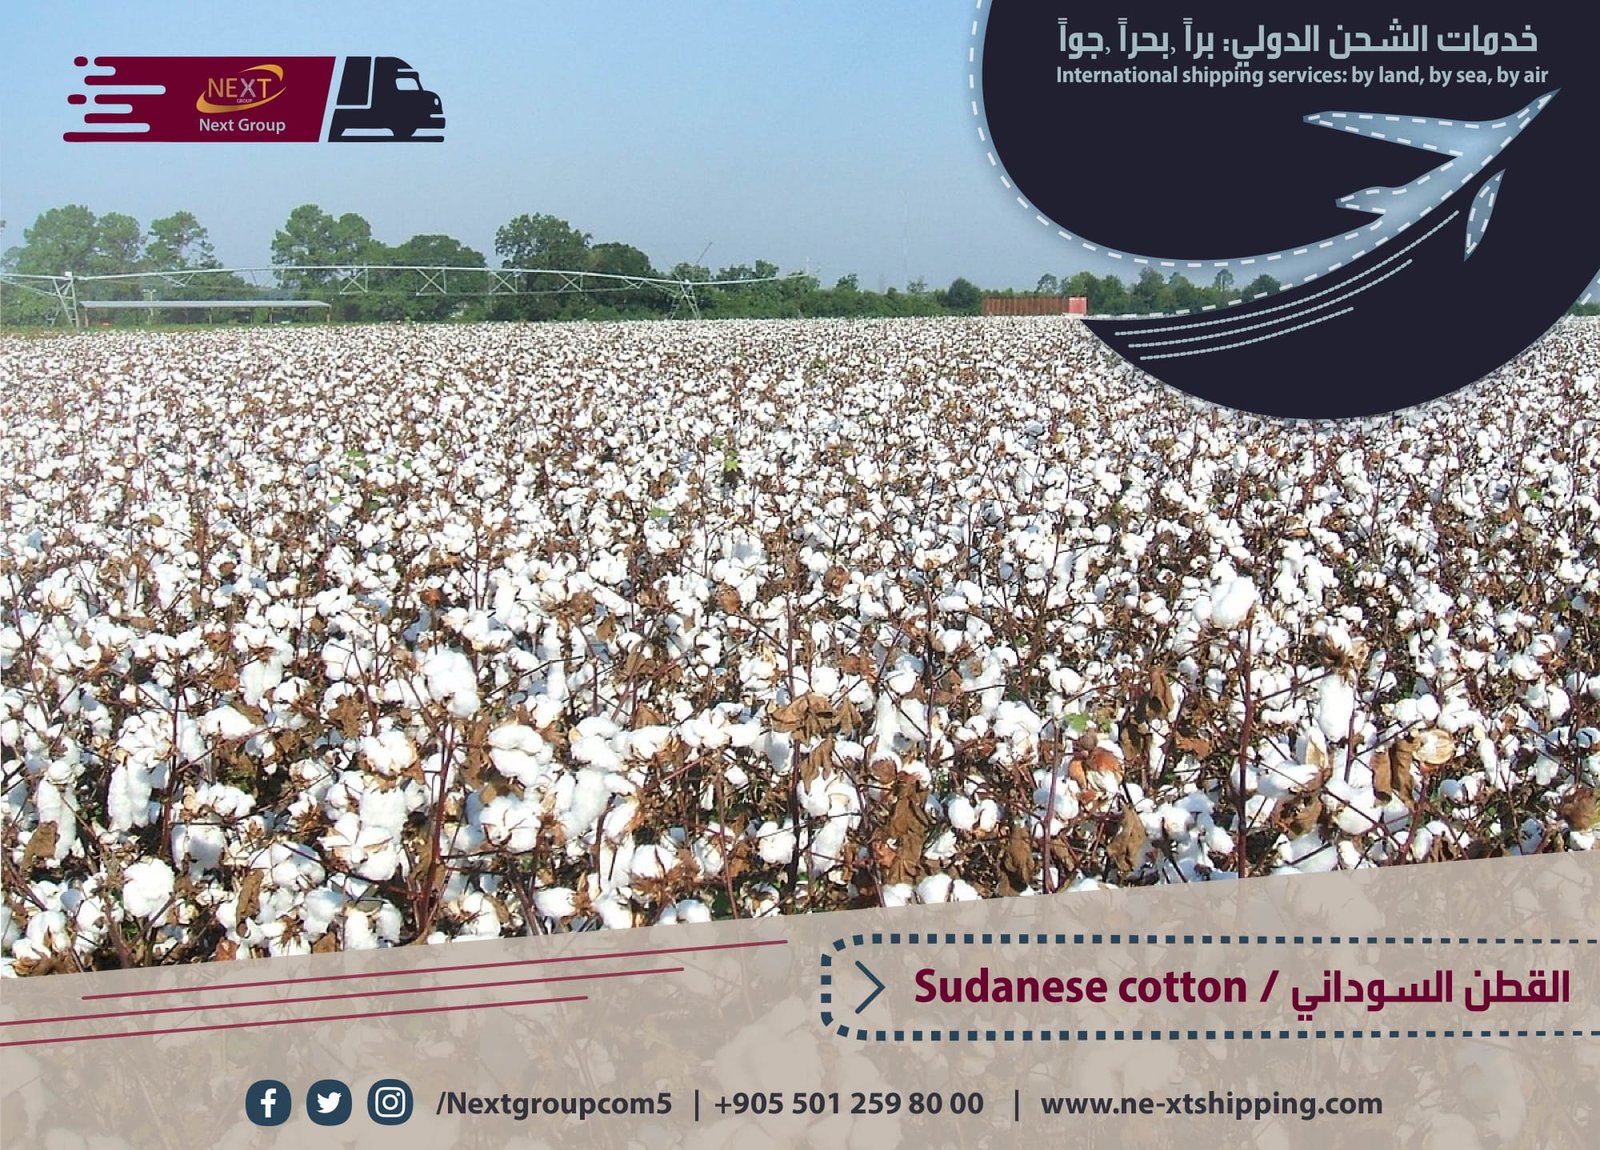 Sudanese cotton is the most important agricultural crop in Sudan and its white gold